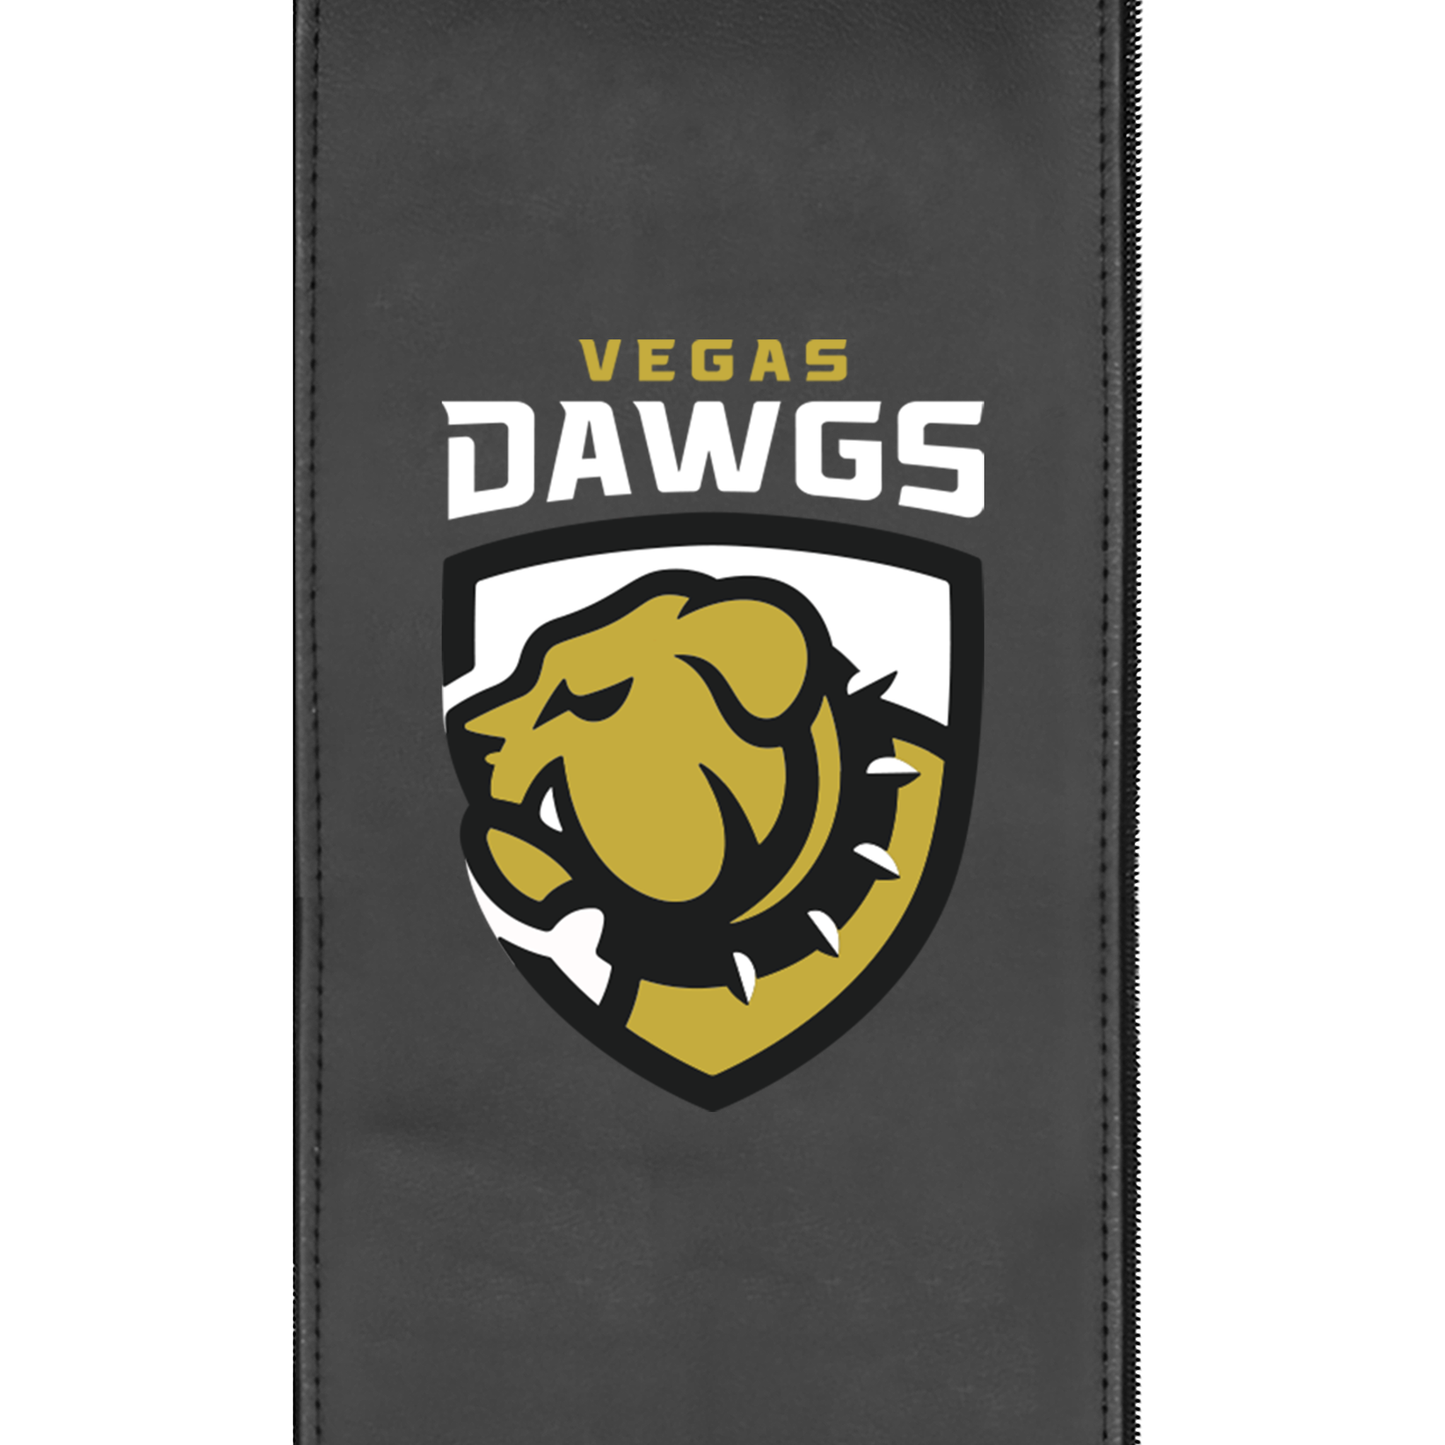 Relax Home Theater Recliner with Vegas Dawgs Logo